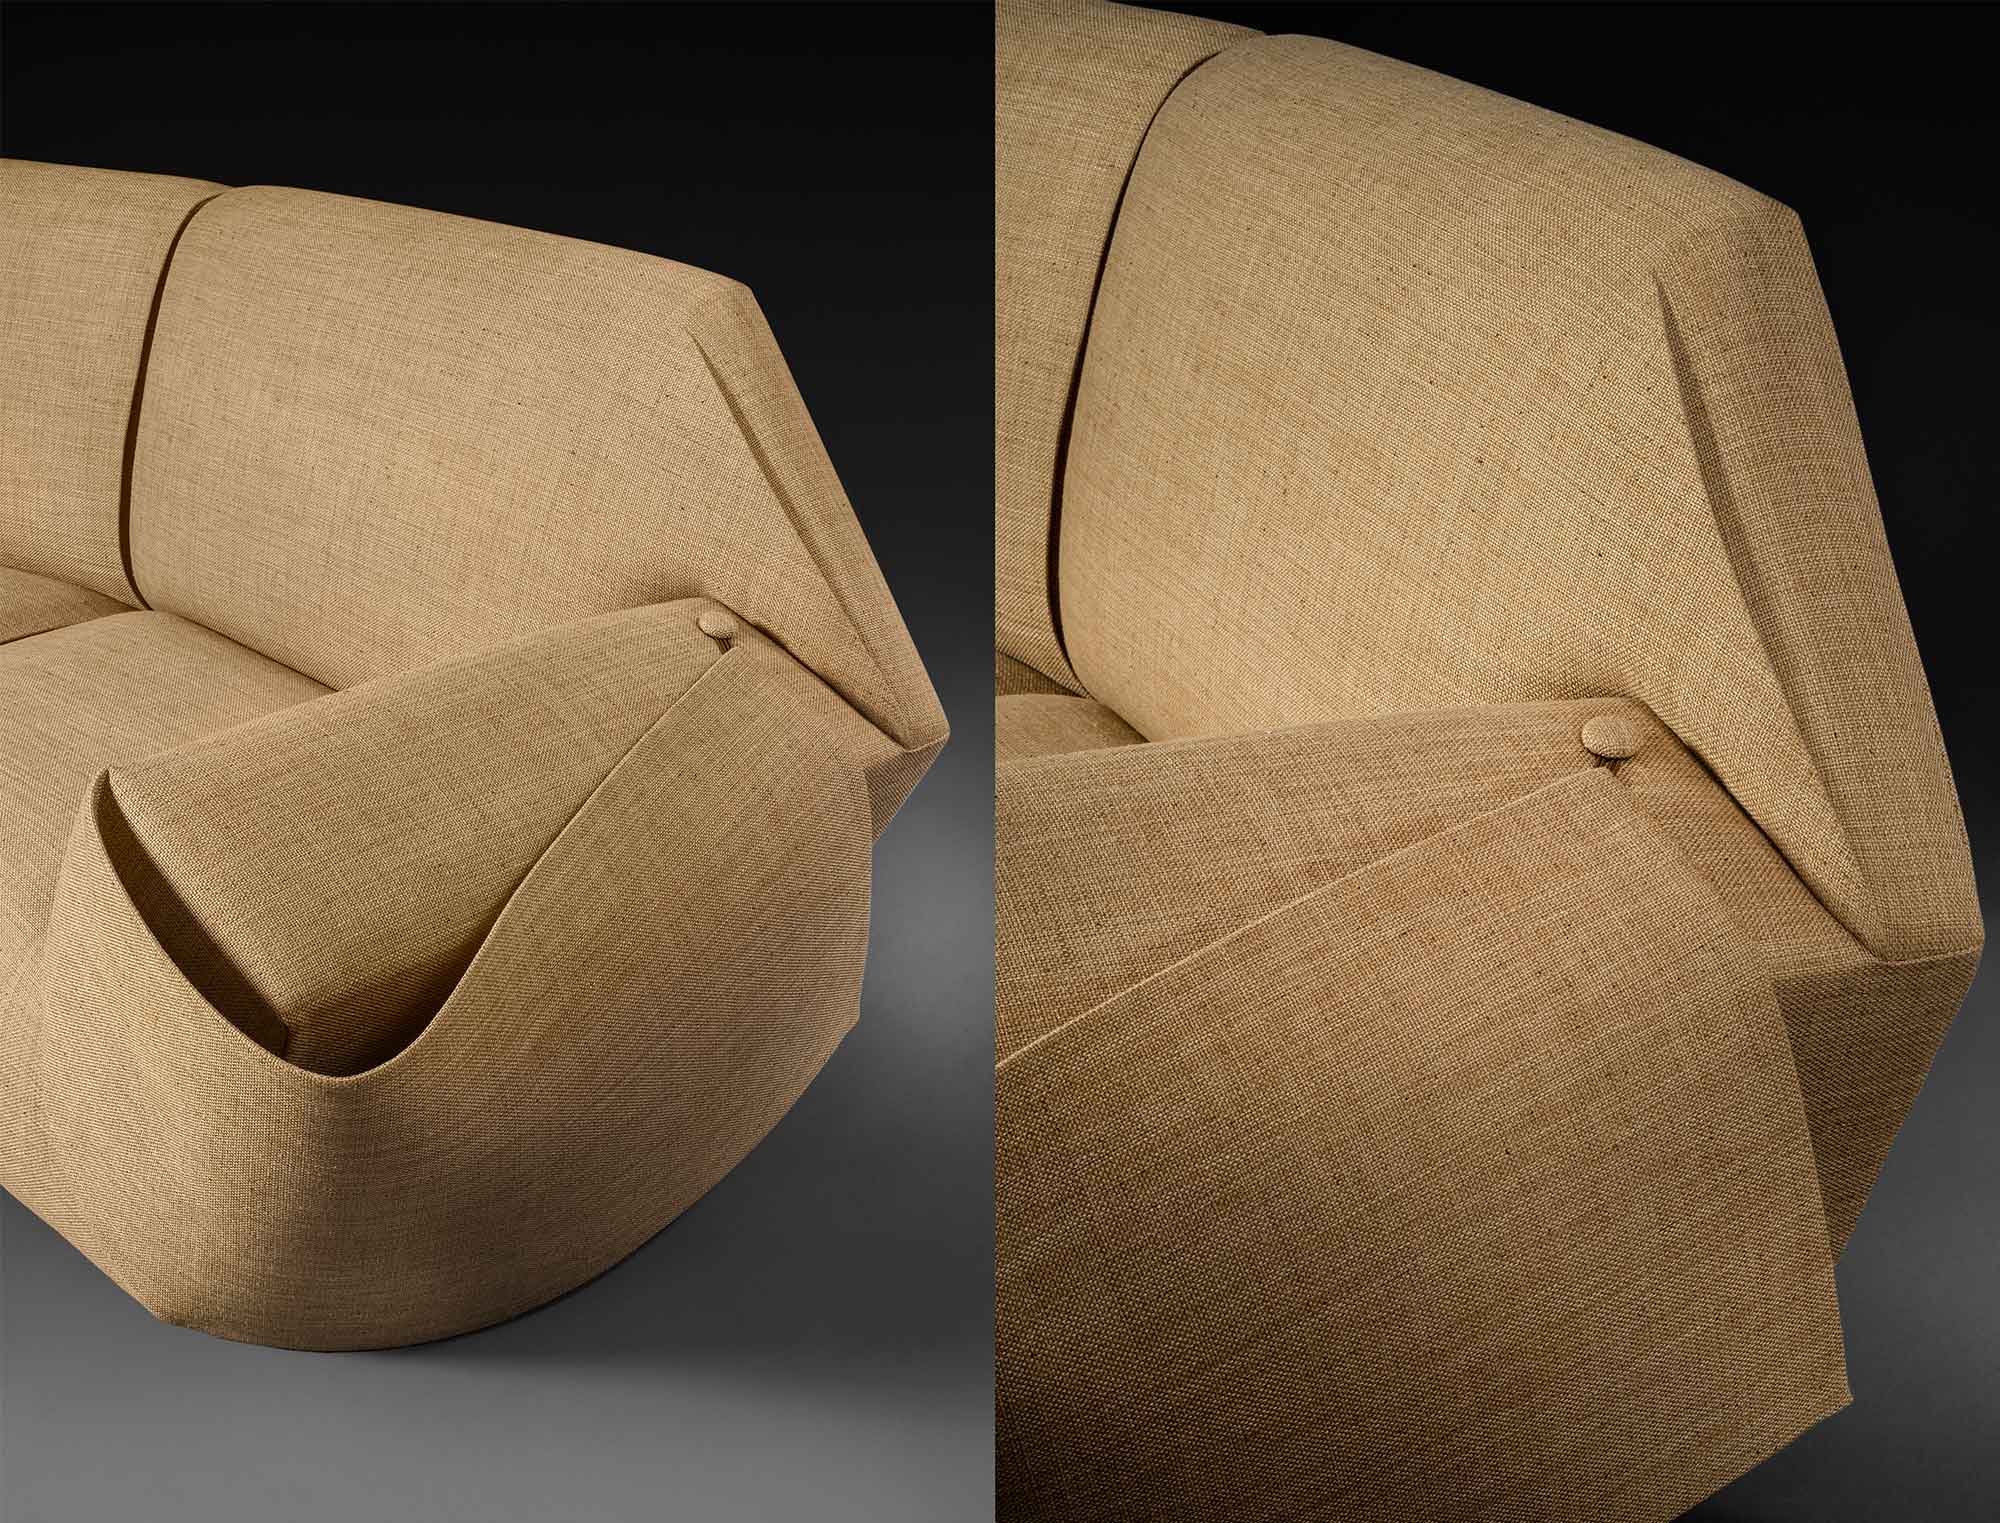 Origami-like drapes of the sofa design by Pinto and Stefano Pilati